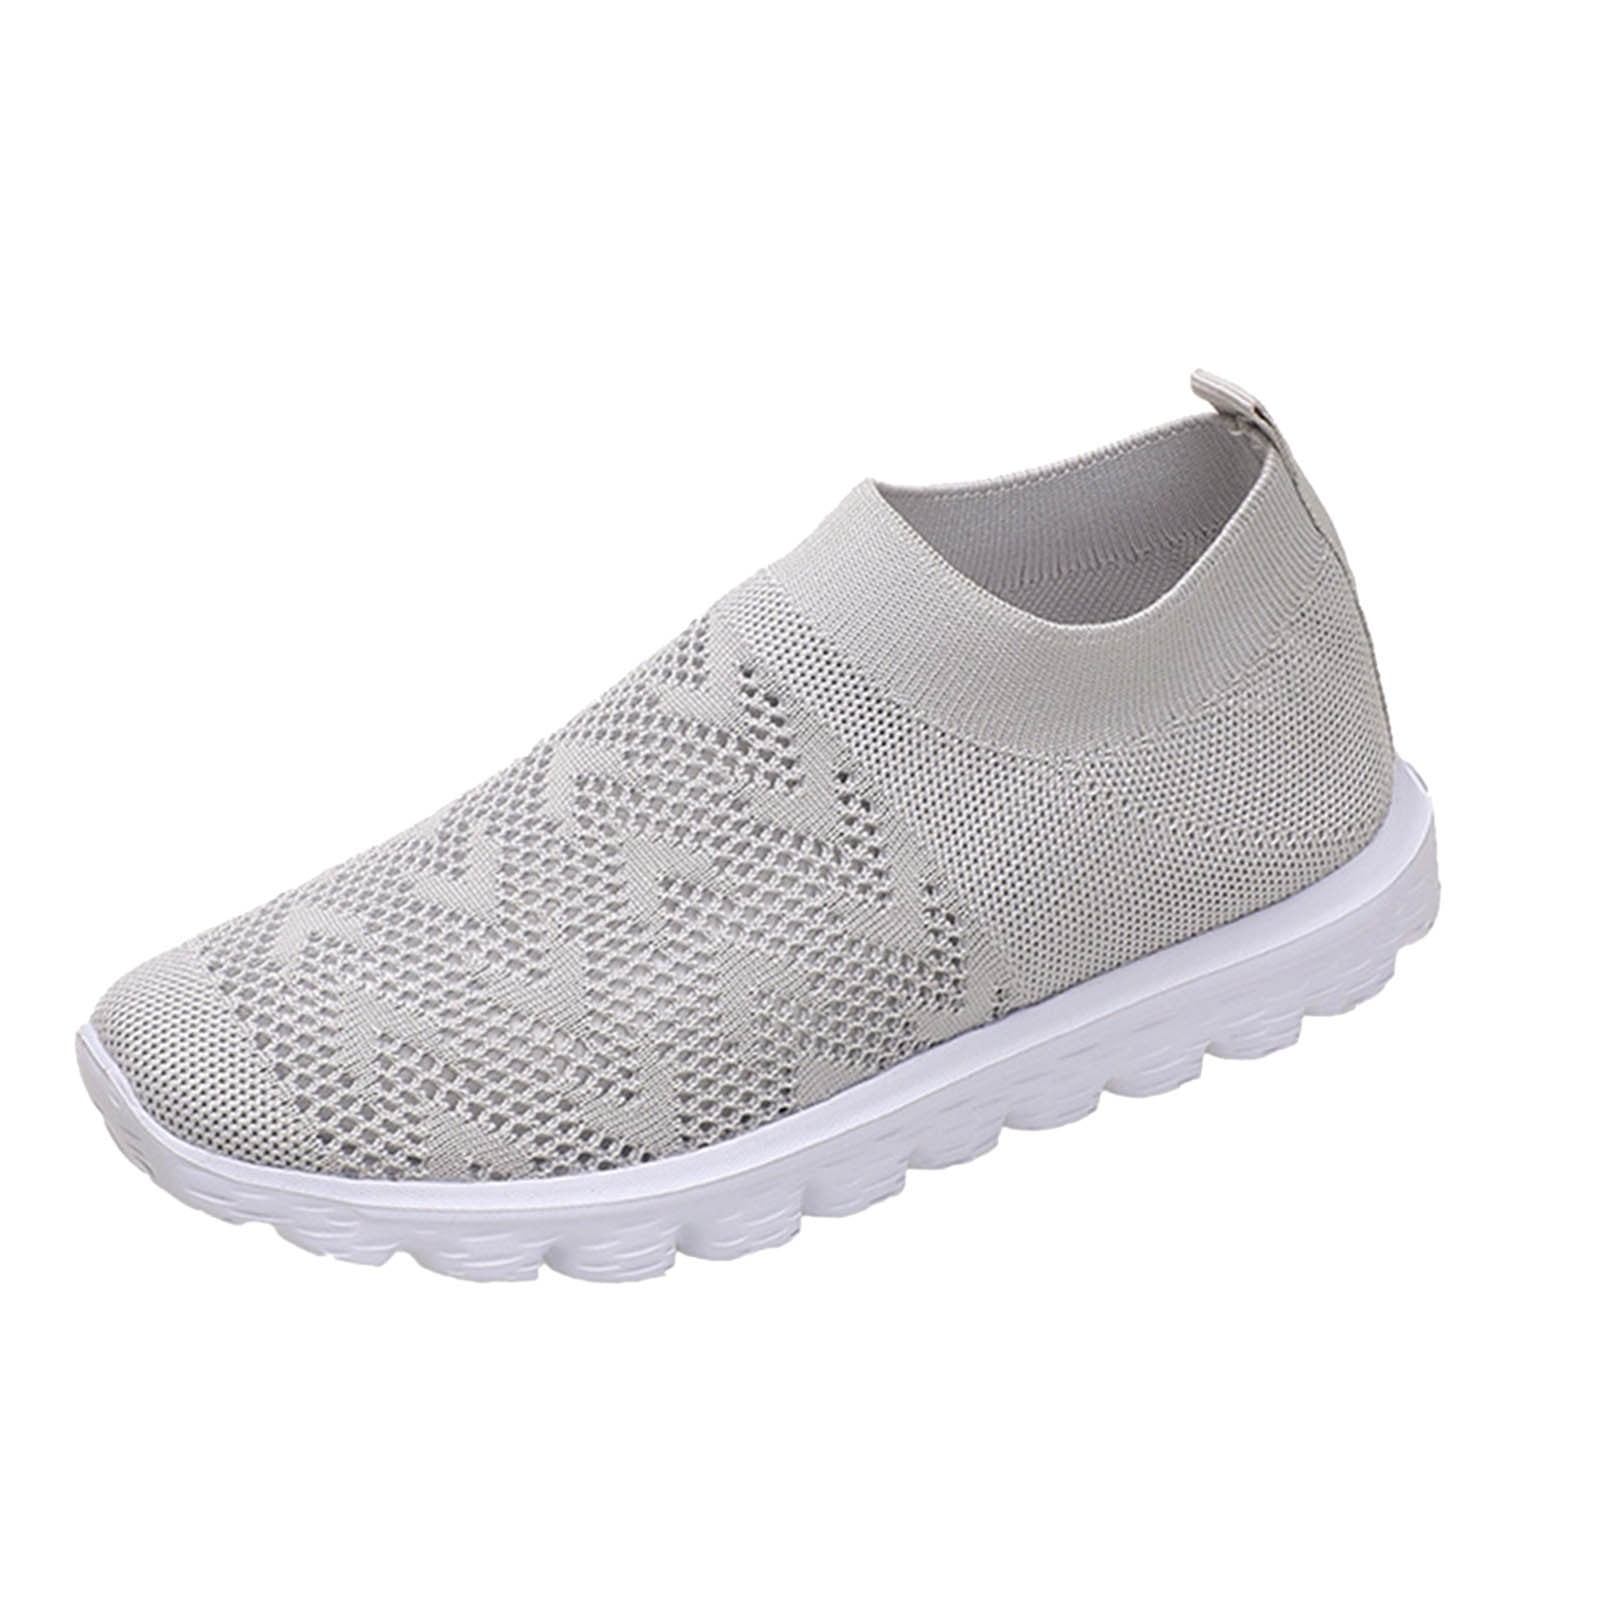 ZHAGHMIN Shoes Women Fashion Summer Women Seakers Mesh Breathable Solid ...